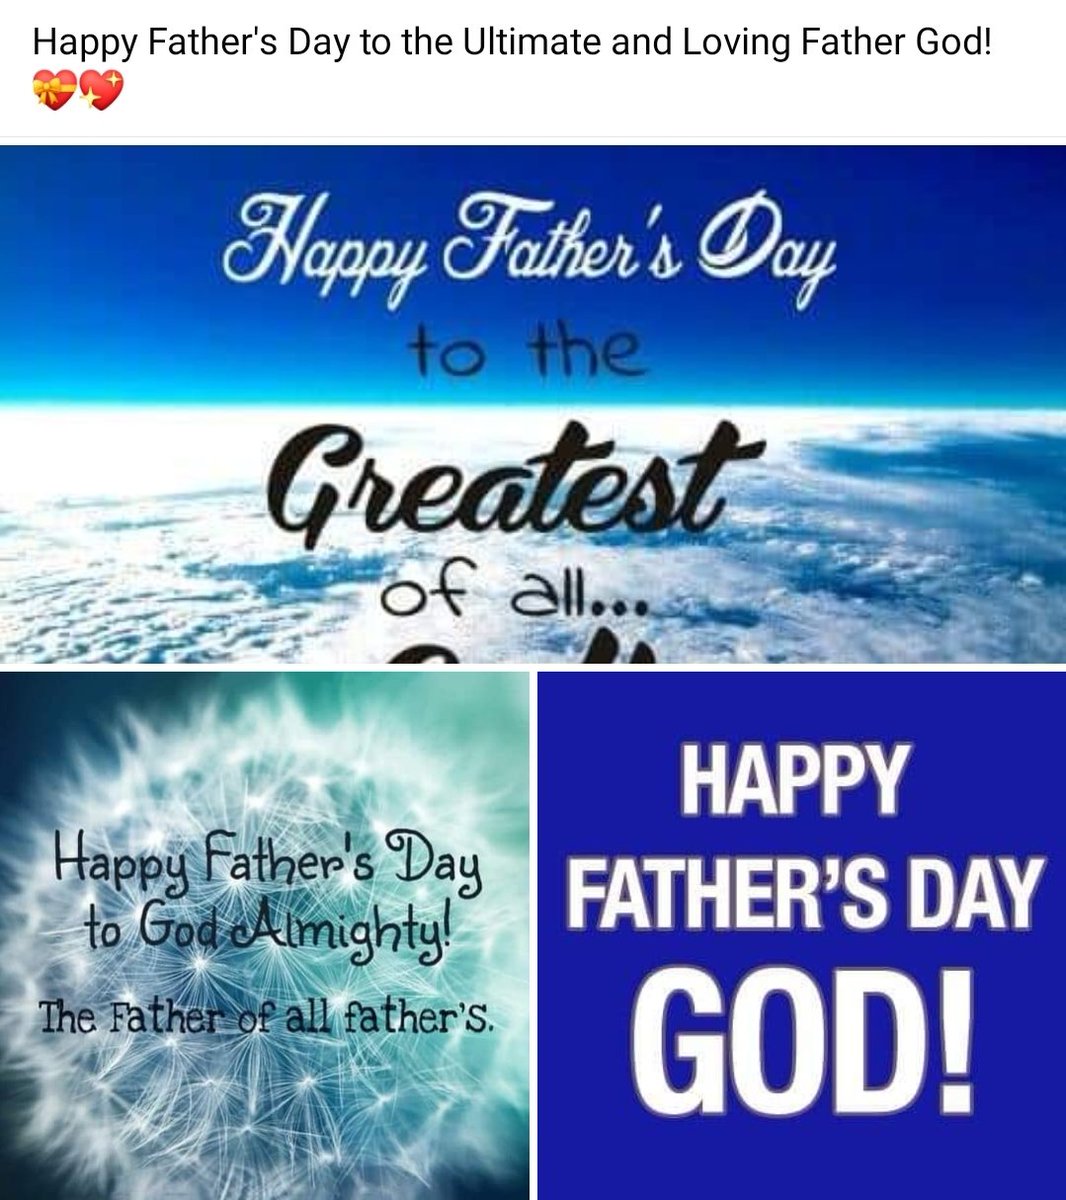 Happy Father's Day to #God! #FathersDay #HappyFathersDay #ThankYouGod #GodisGood 'One God and Father of all, who is over all and through all and in all.' #Ephesians4:6